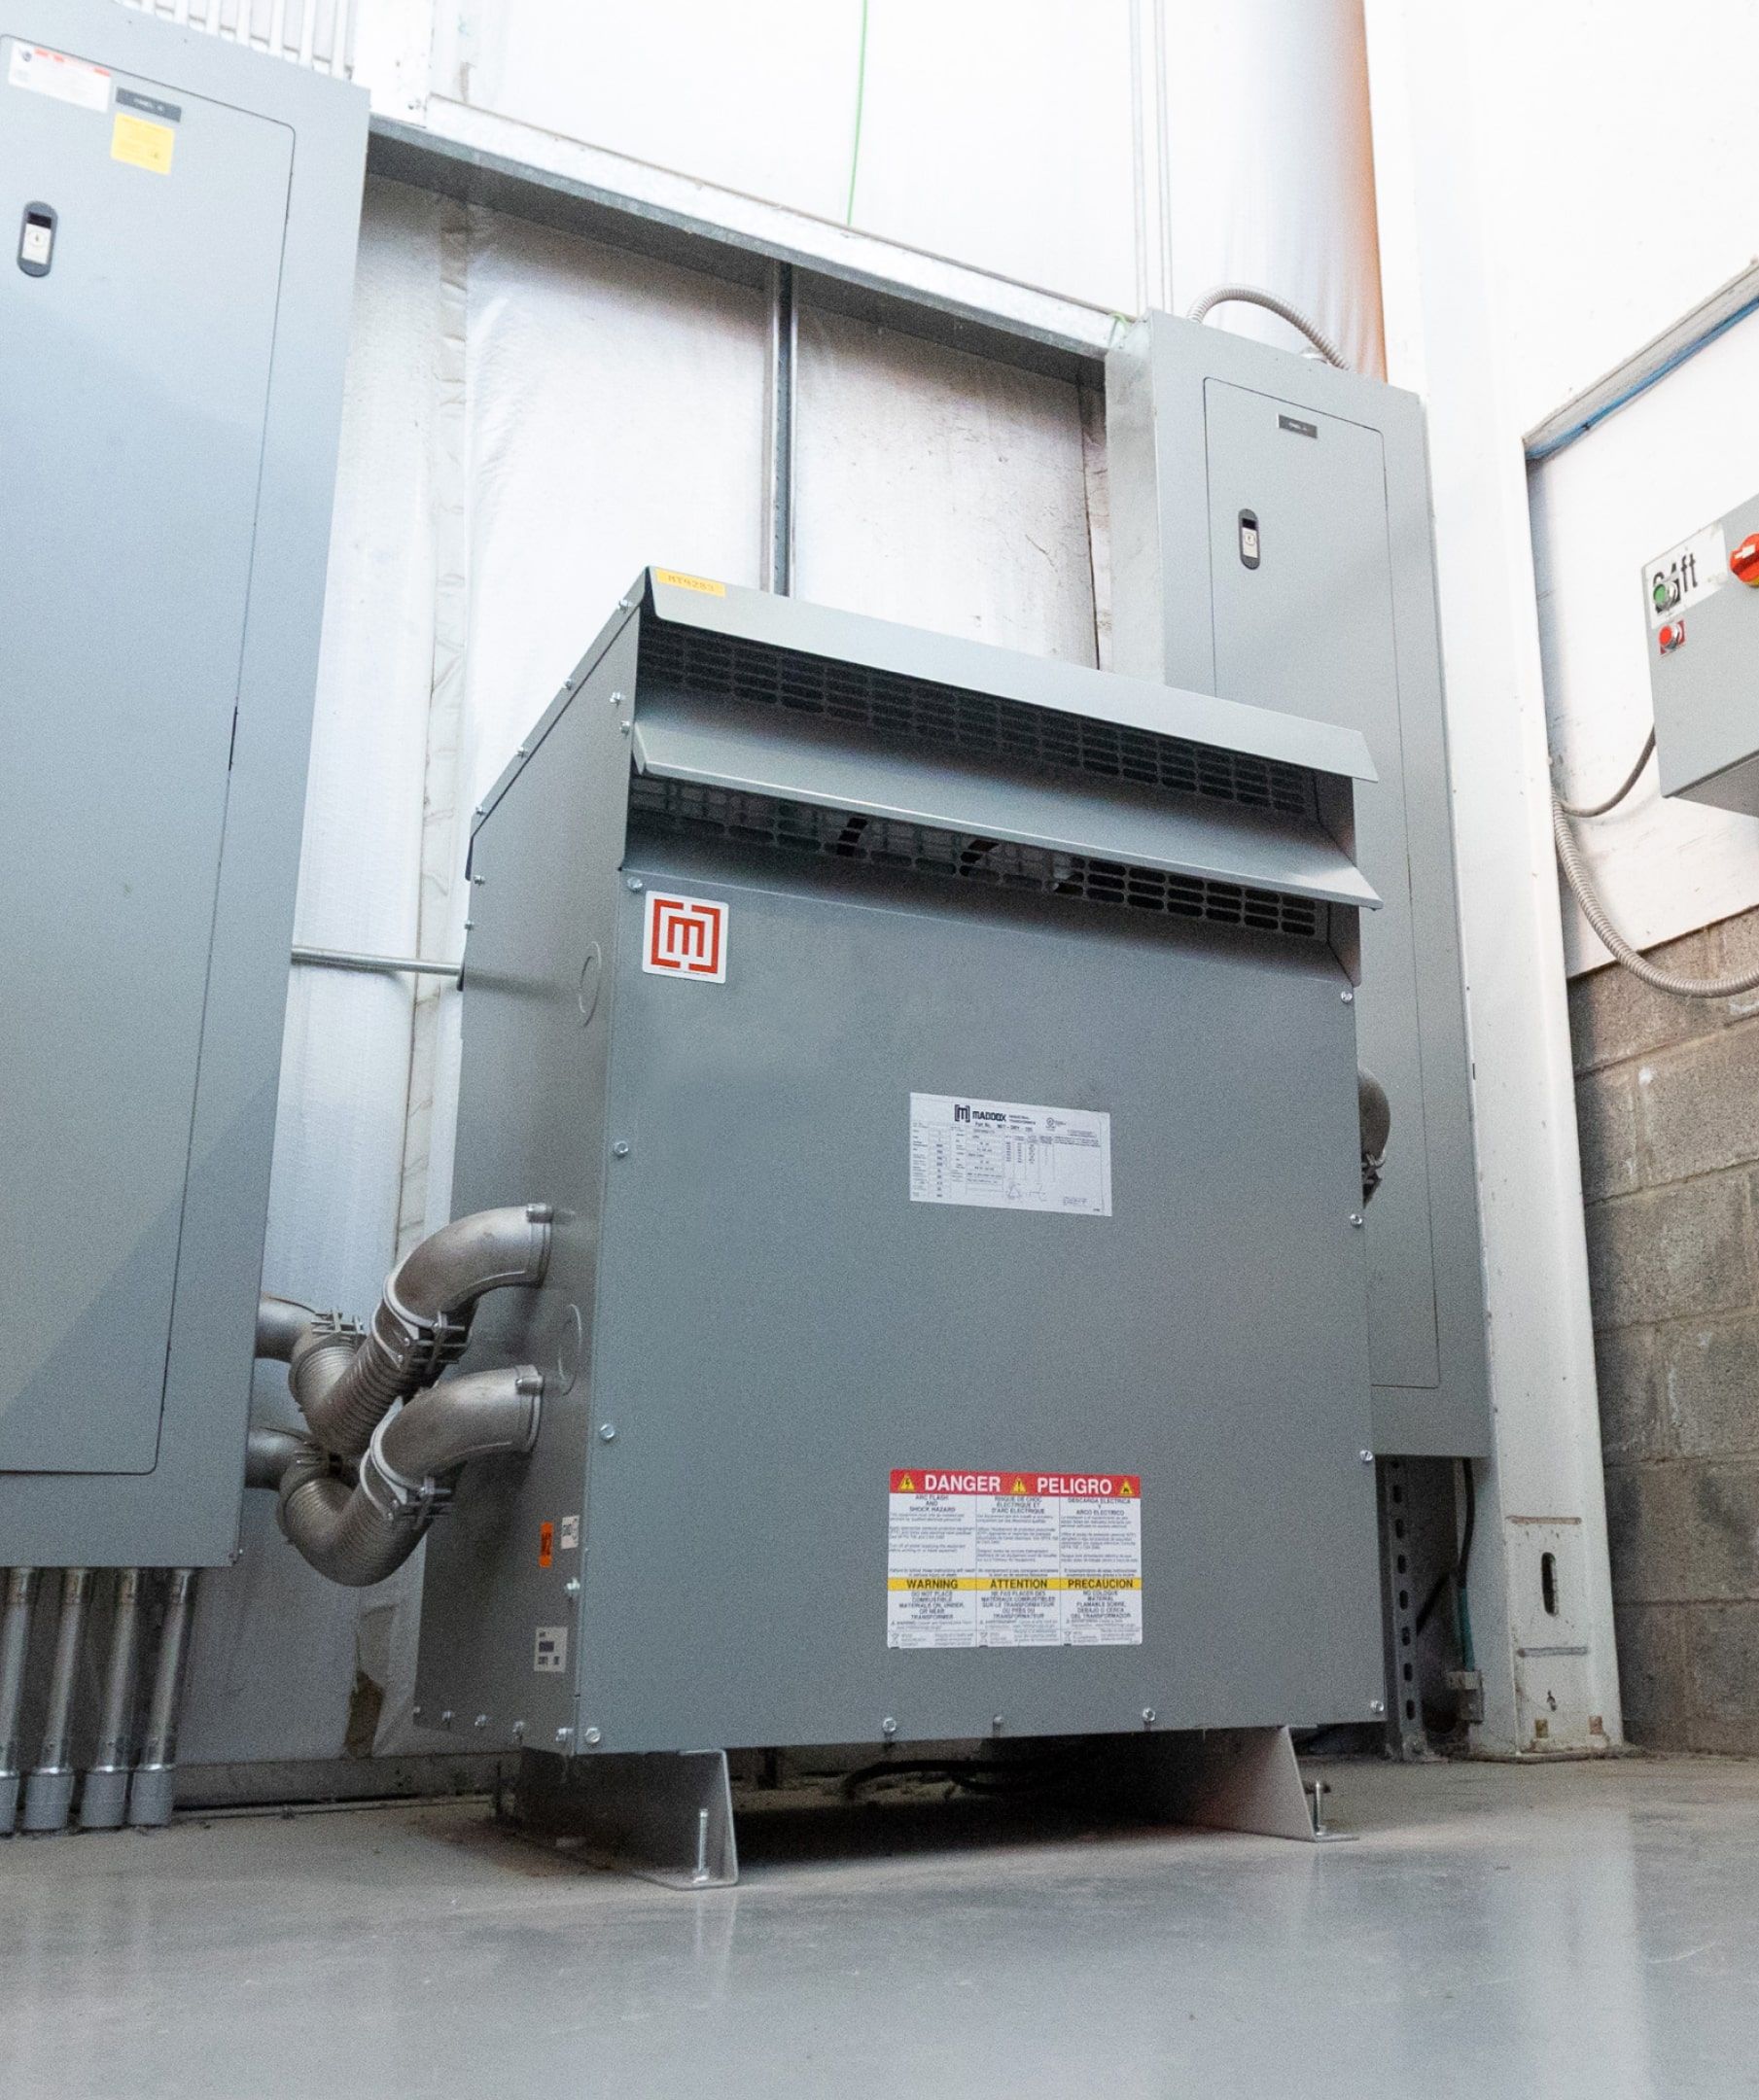 Maddox low voltage dry type transformer installed